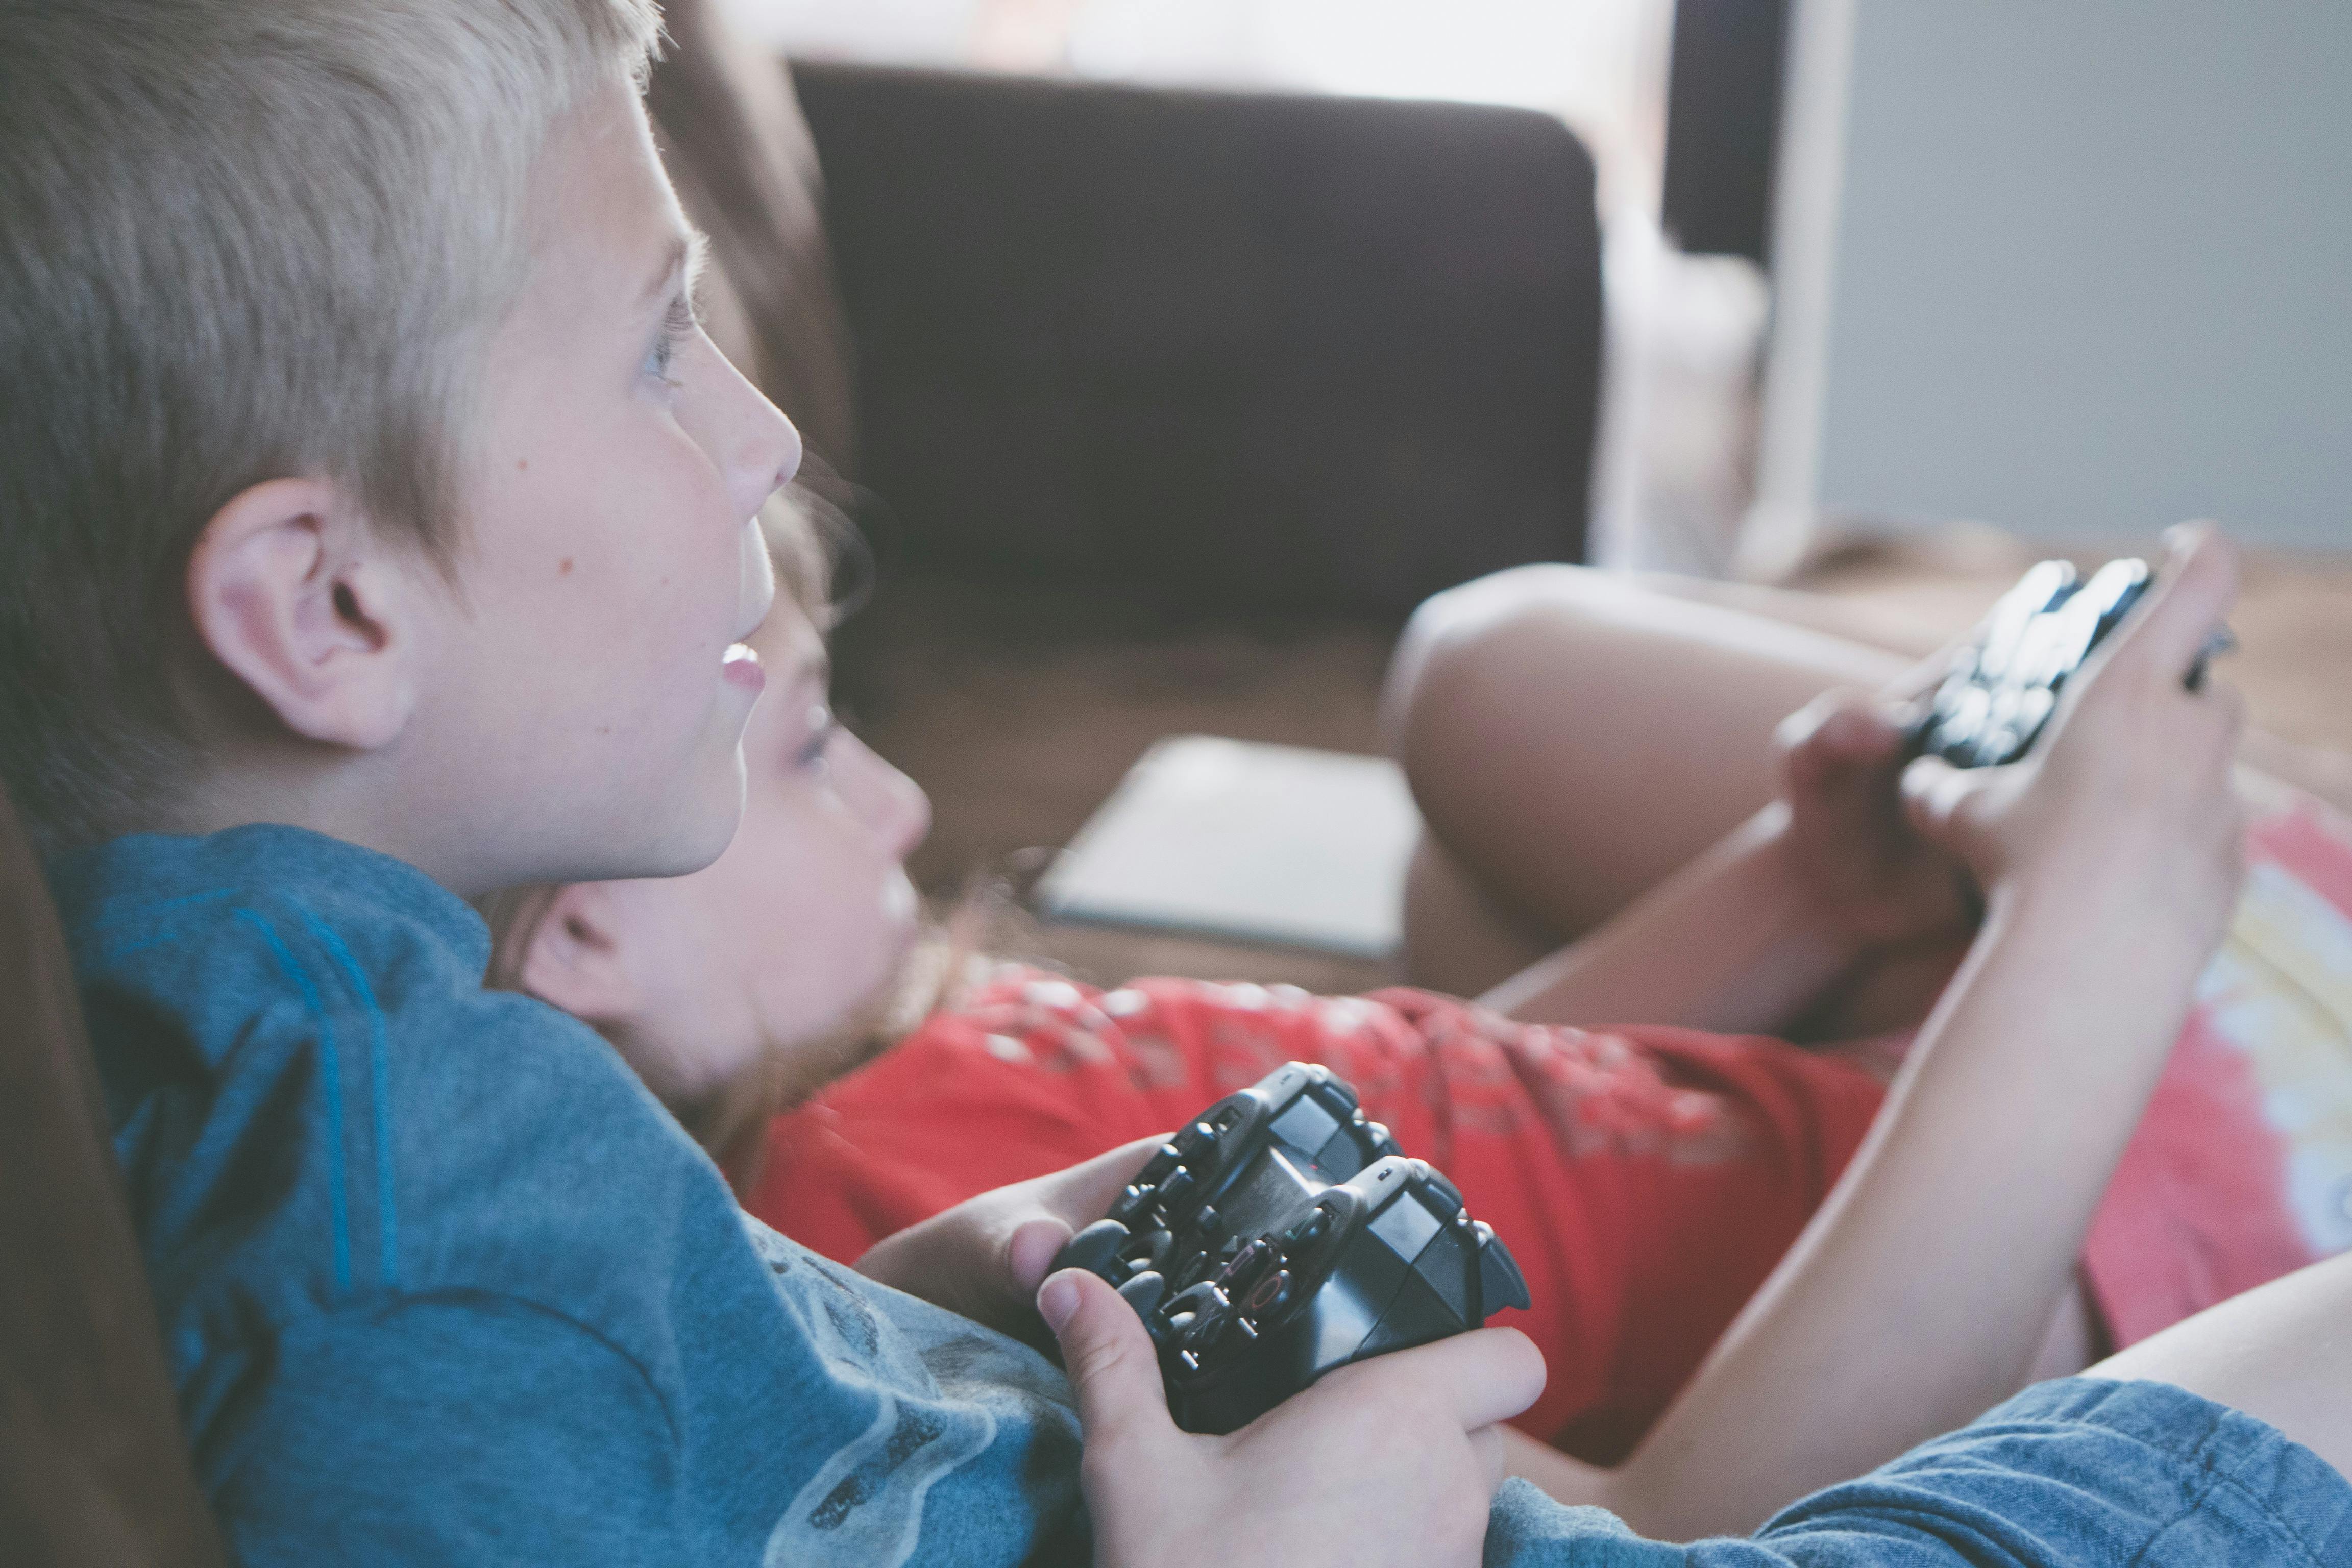 Kids play a video game | Source: Pexels